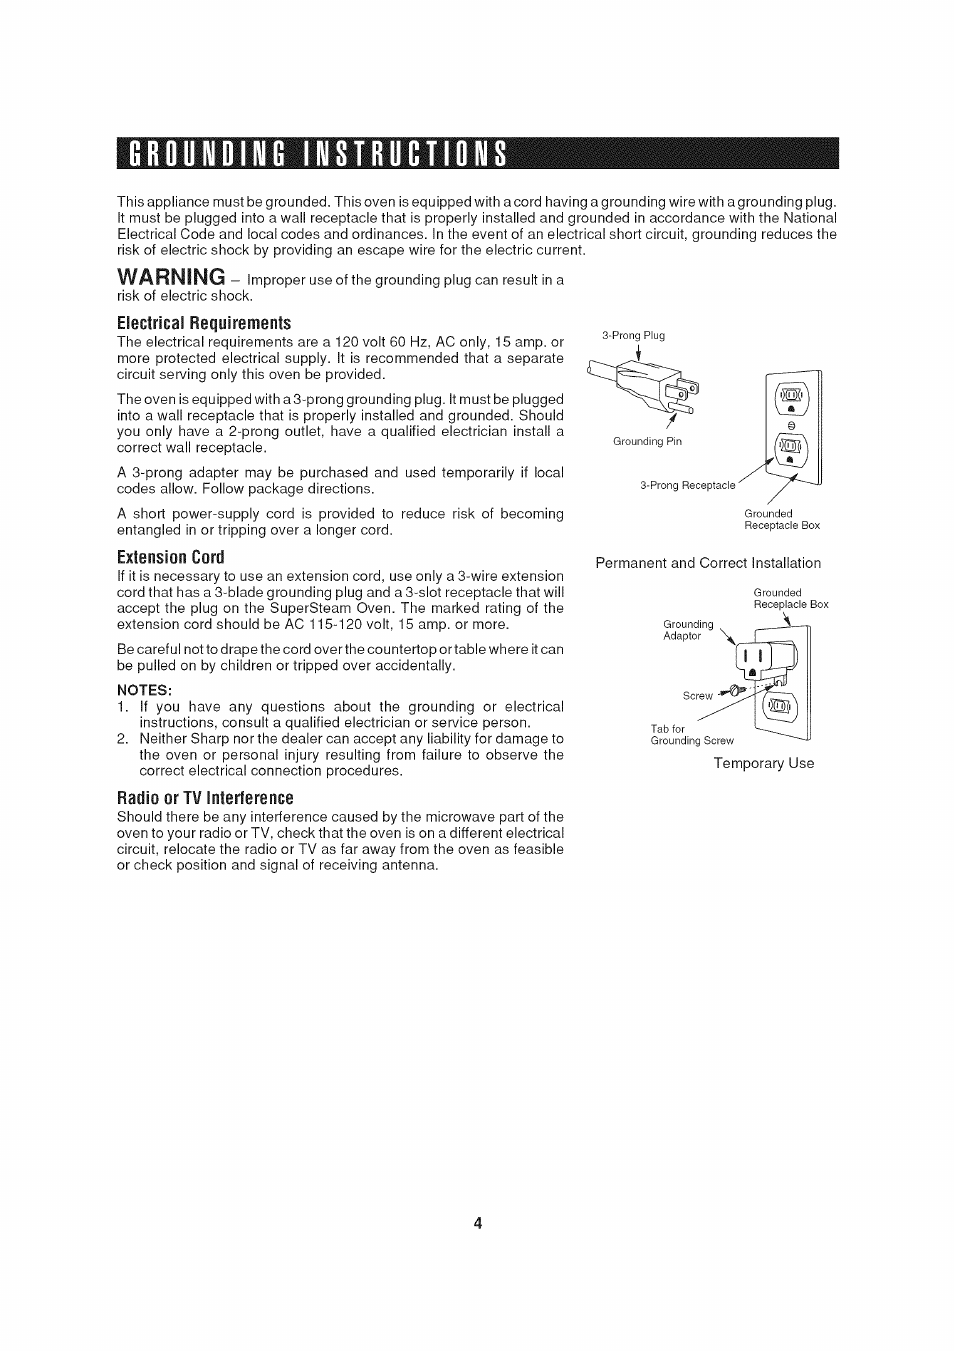 Grounding ingtructiong, Electrical requirements, Extension cord | Notes, Radio or tv interference, Grounding instructions, Warning | Sharp AX-1200 User Manual | Page 6 / 43